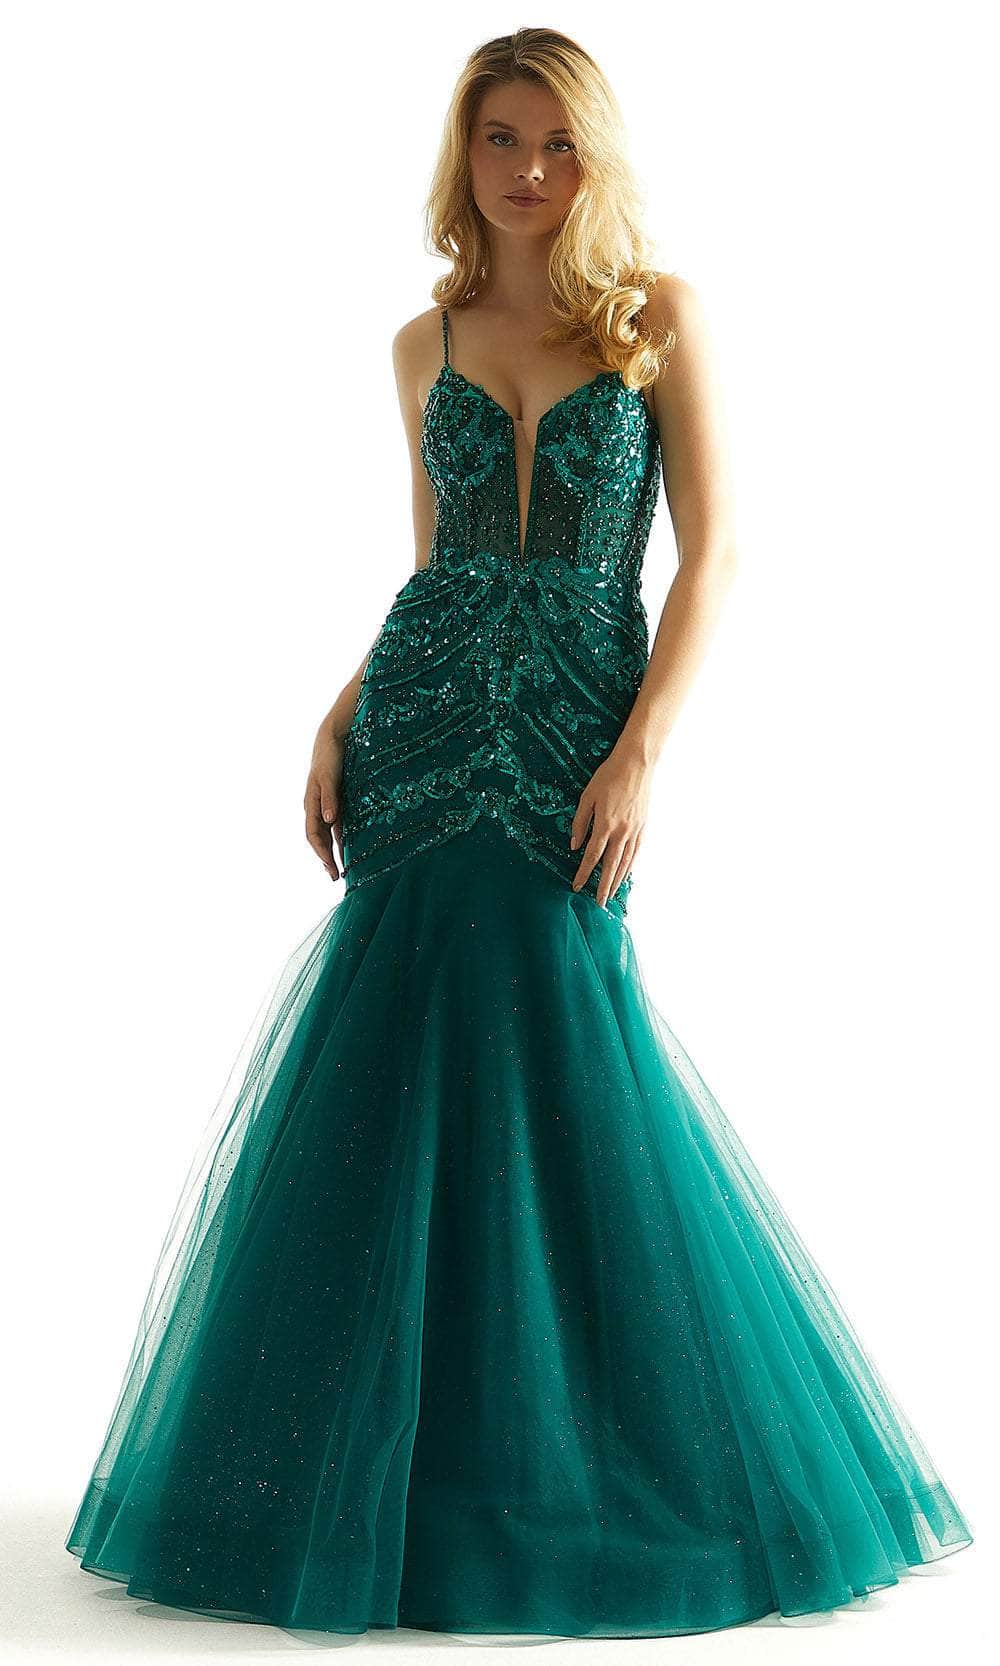 Image of Mori Lee 49014 - Plunging Beaded Prom Dress